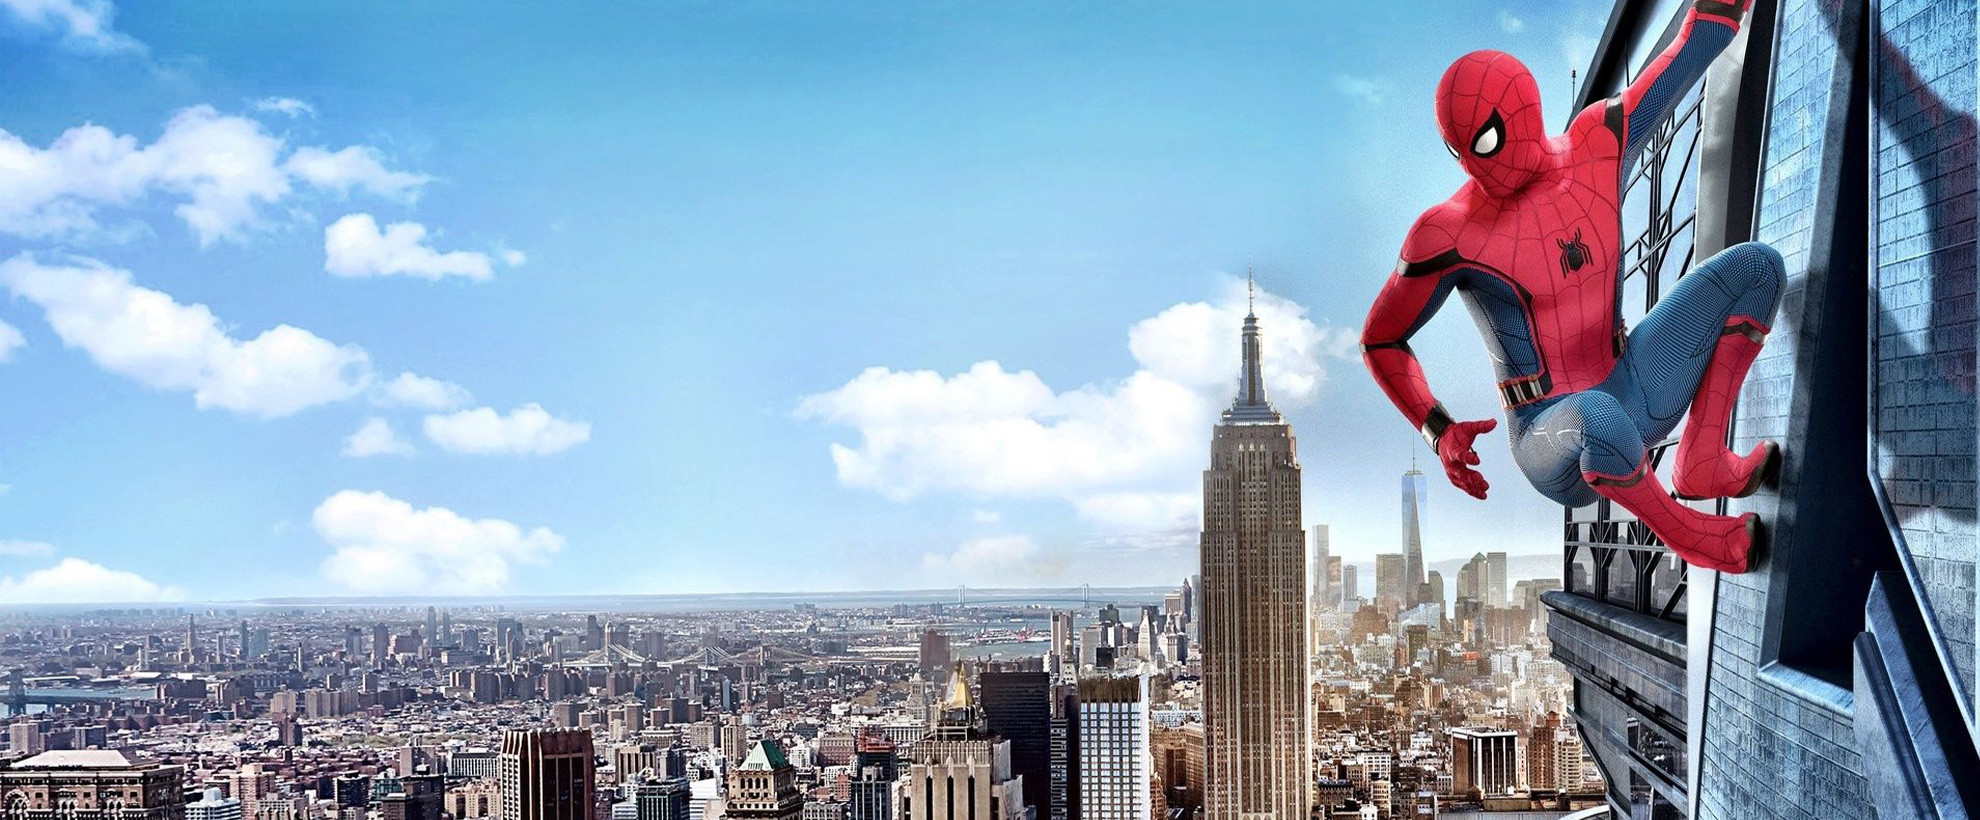 Tom Holland's Spider-Man sits on the side of a building, above a large New York cityscape